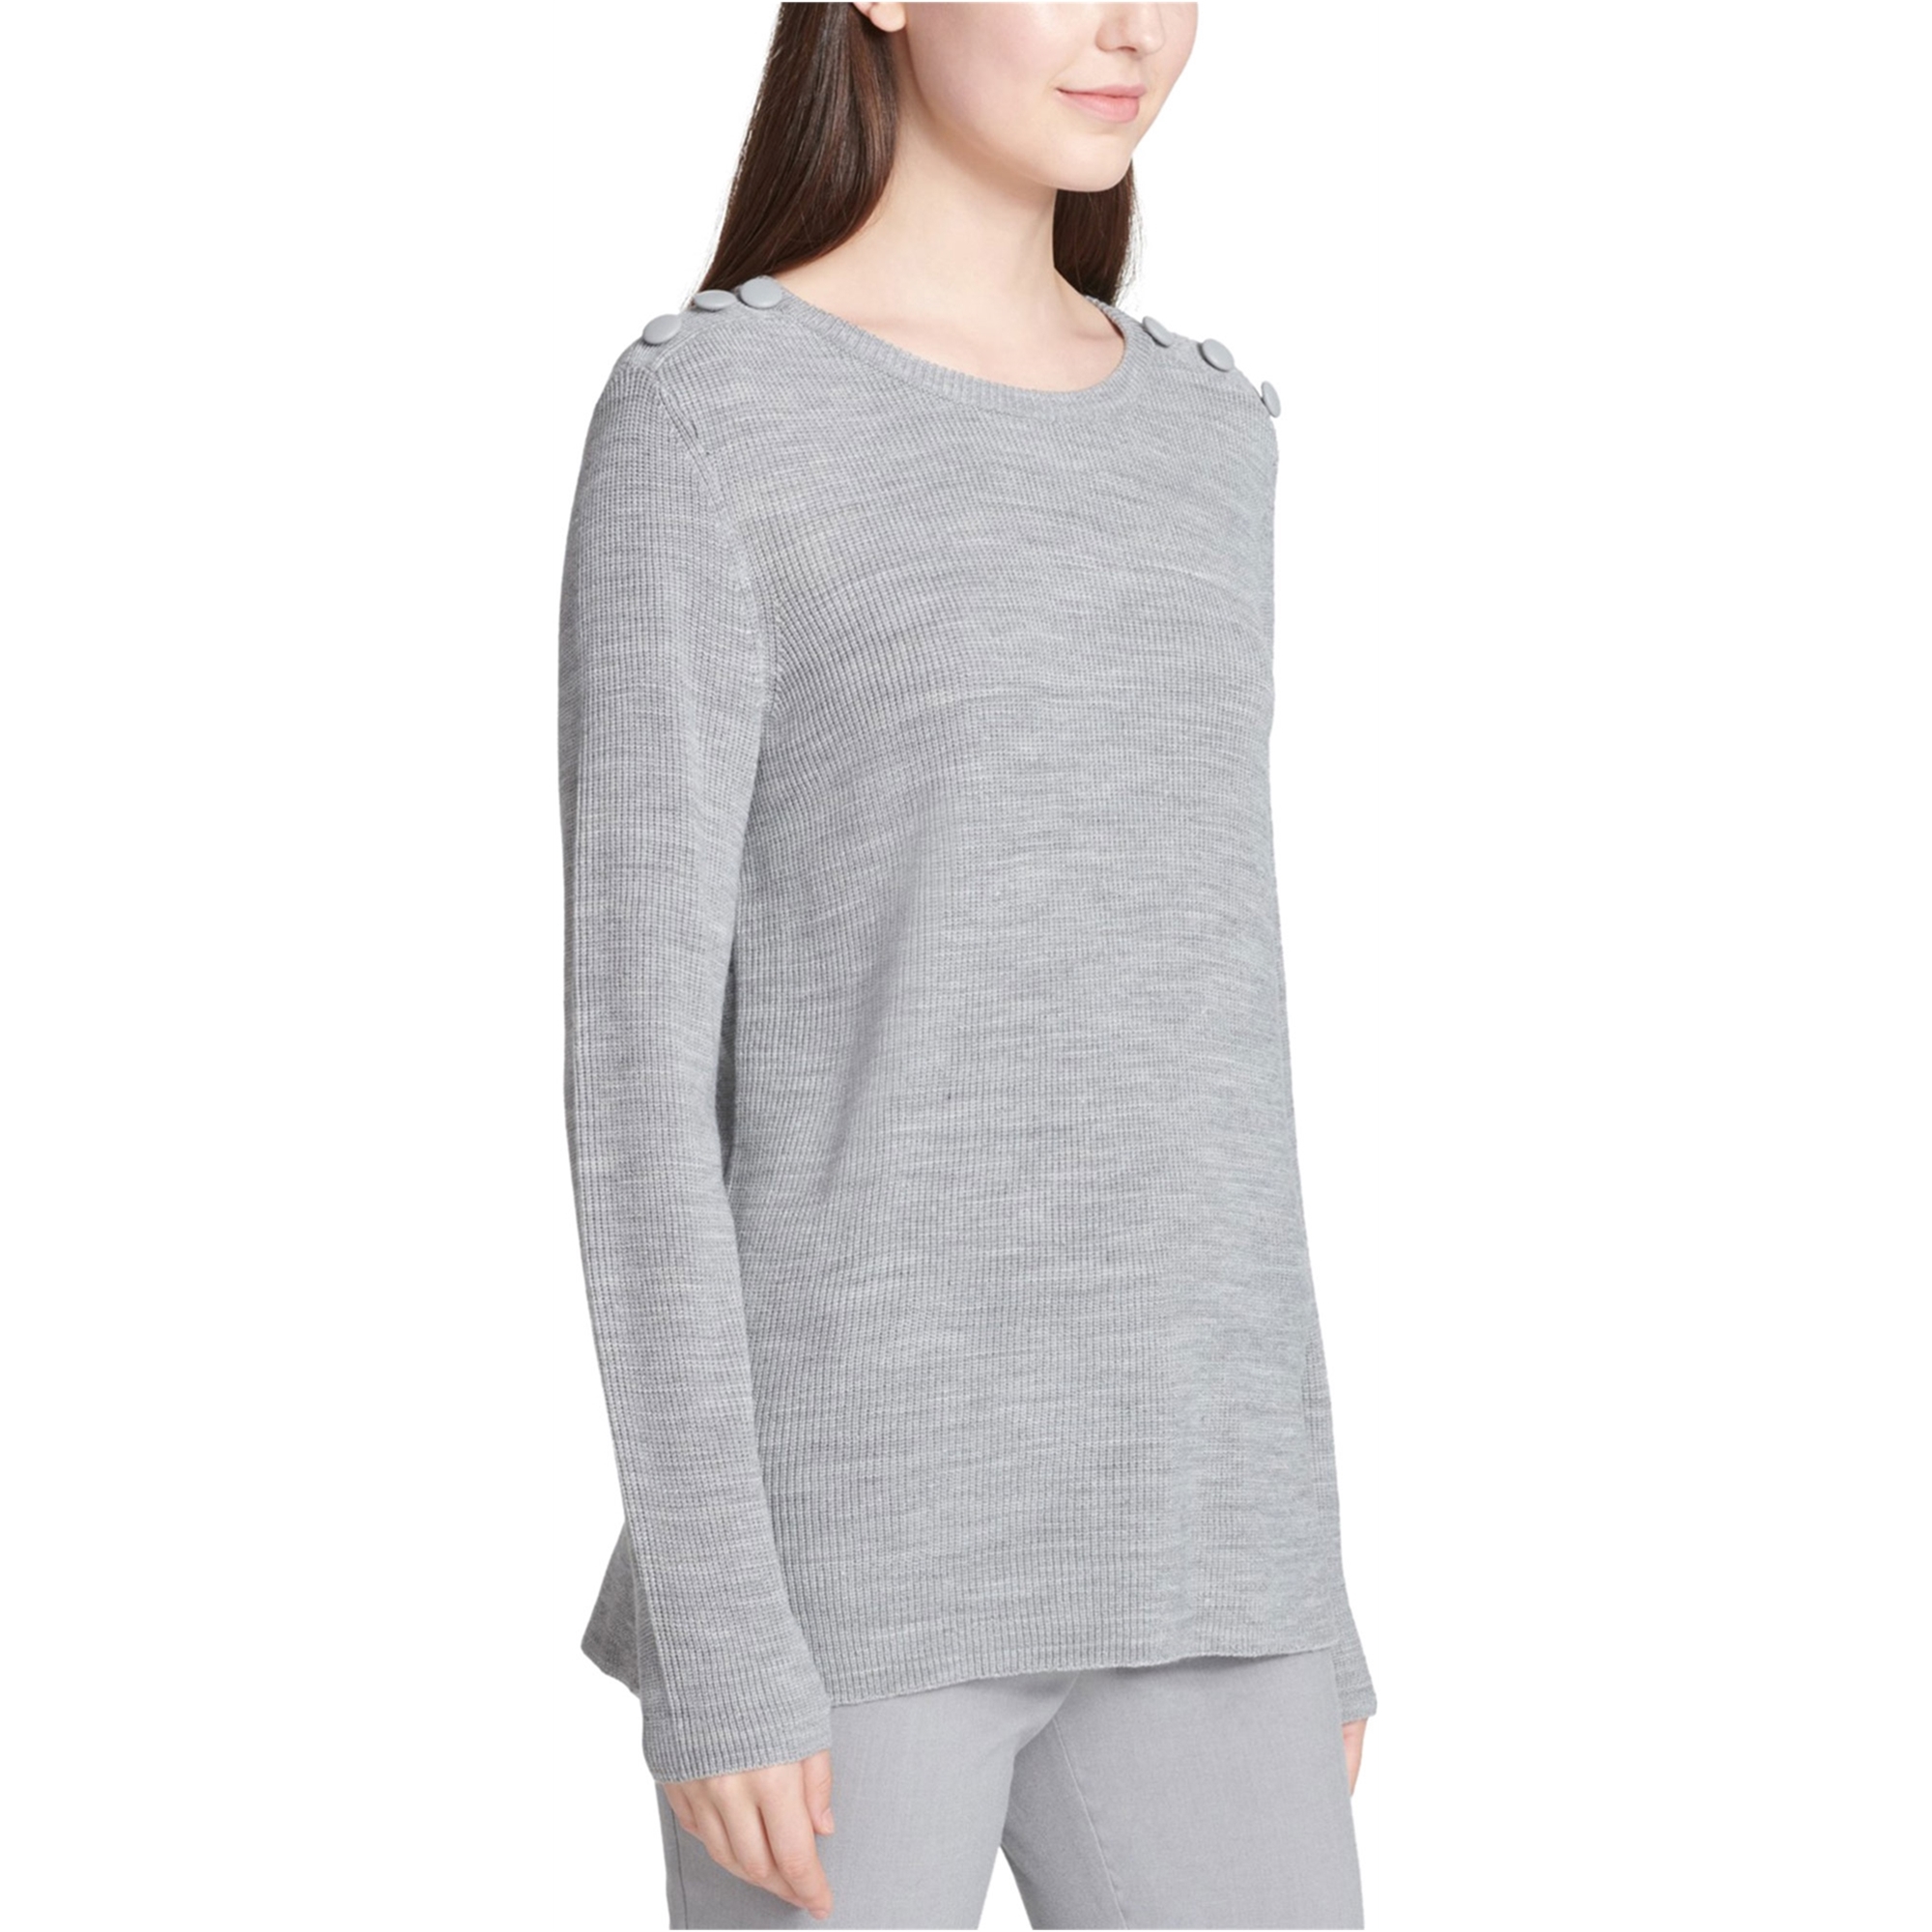 Calvin Klein Womens Shoulder Button Pullover Sweater, Grey, Large - image 1 of 1